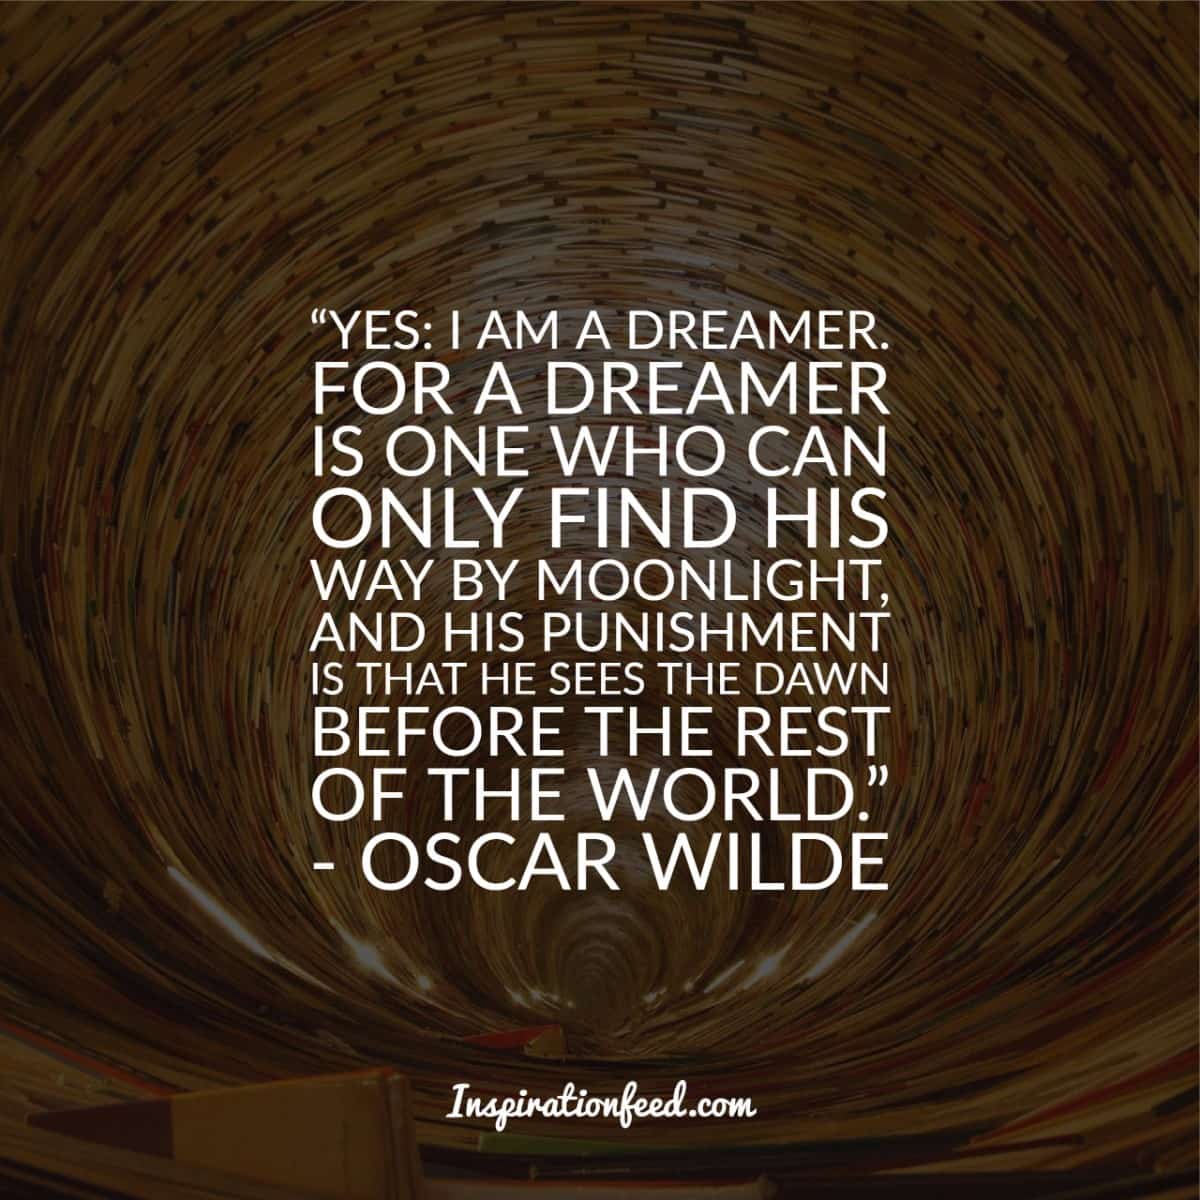 30 Oscar Wilde Quotes About Beauty And Life | Inspirationfeed